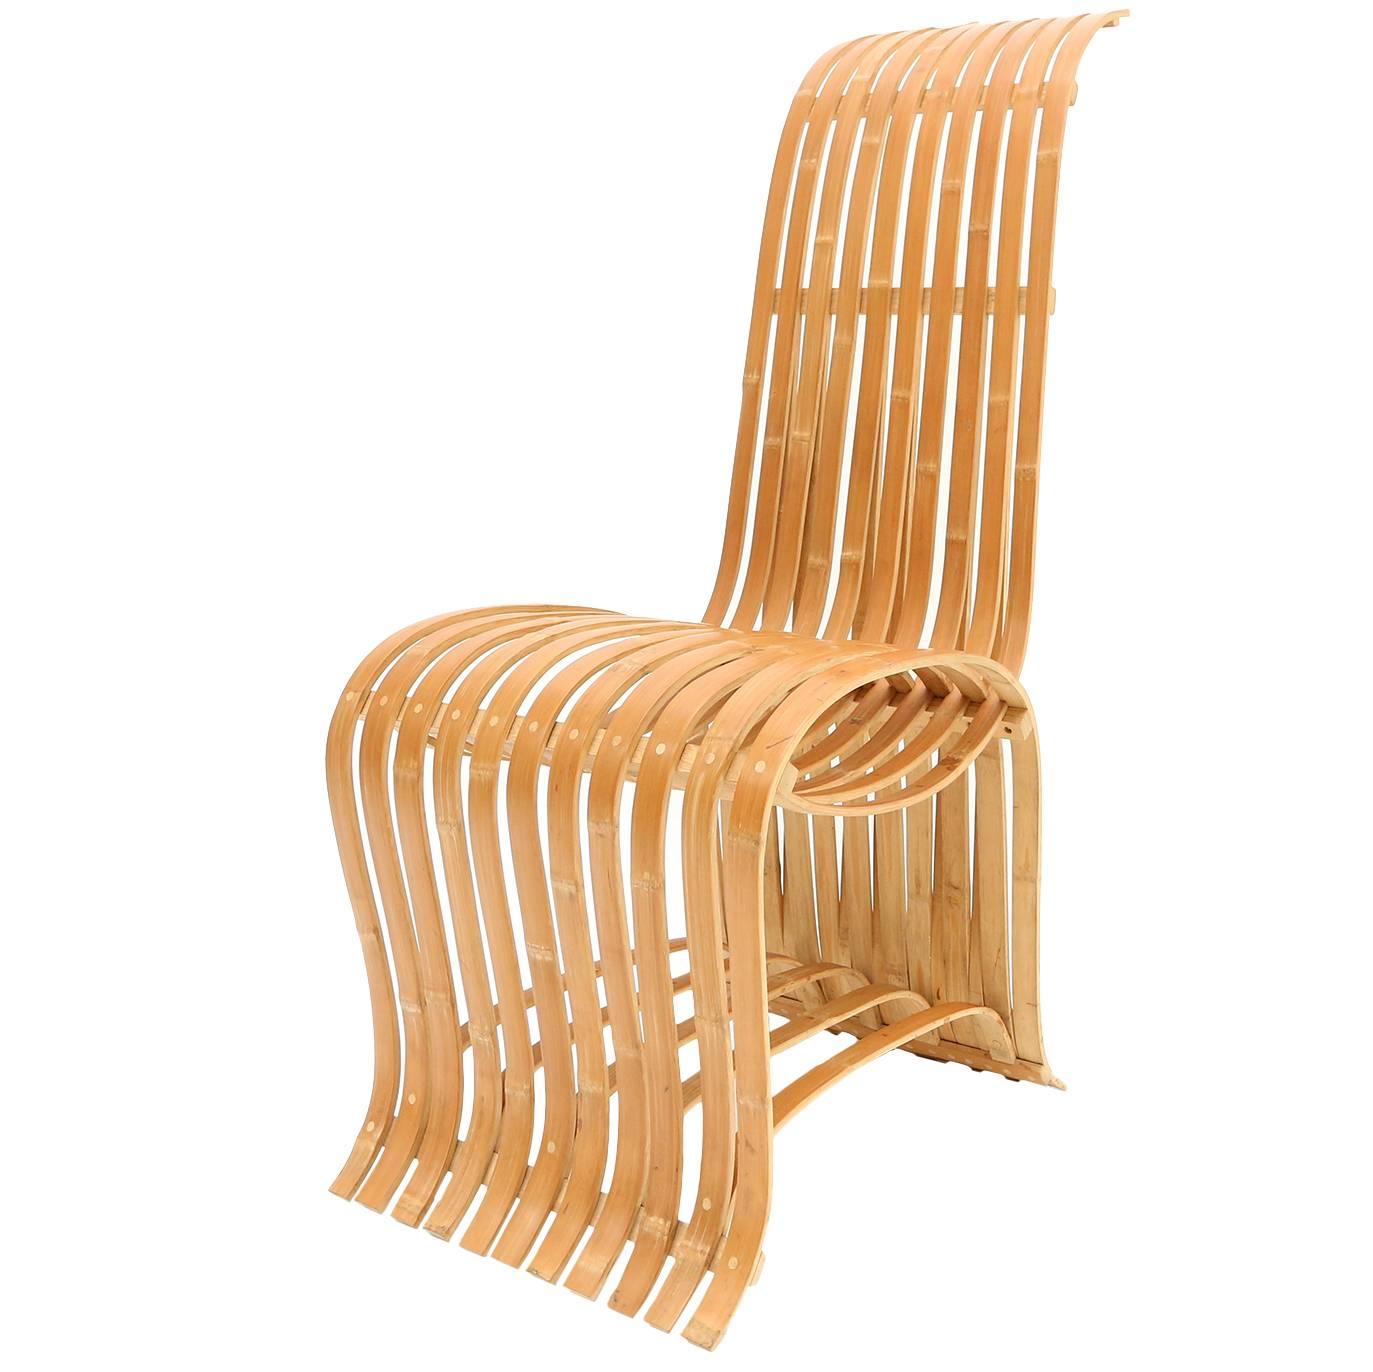 Midcentury Sculptural Bamboo Chair